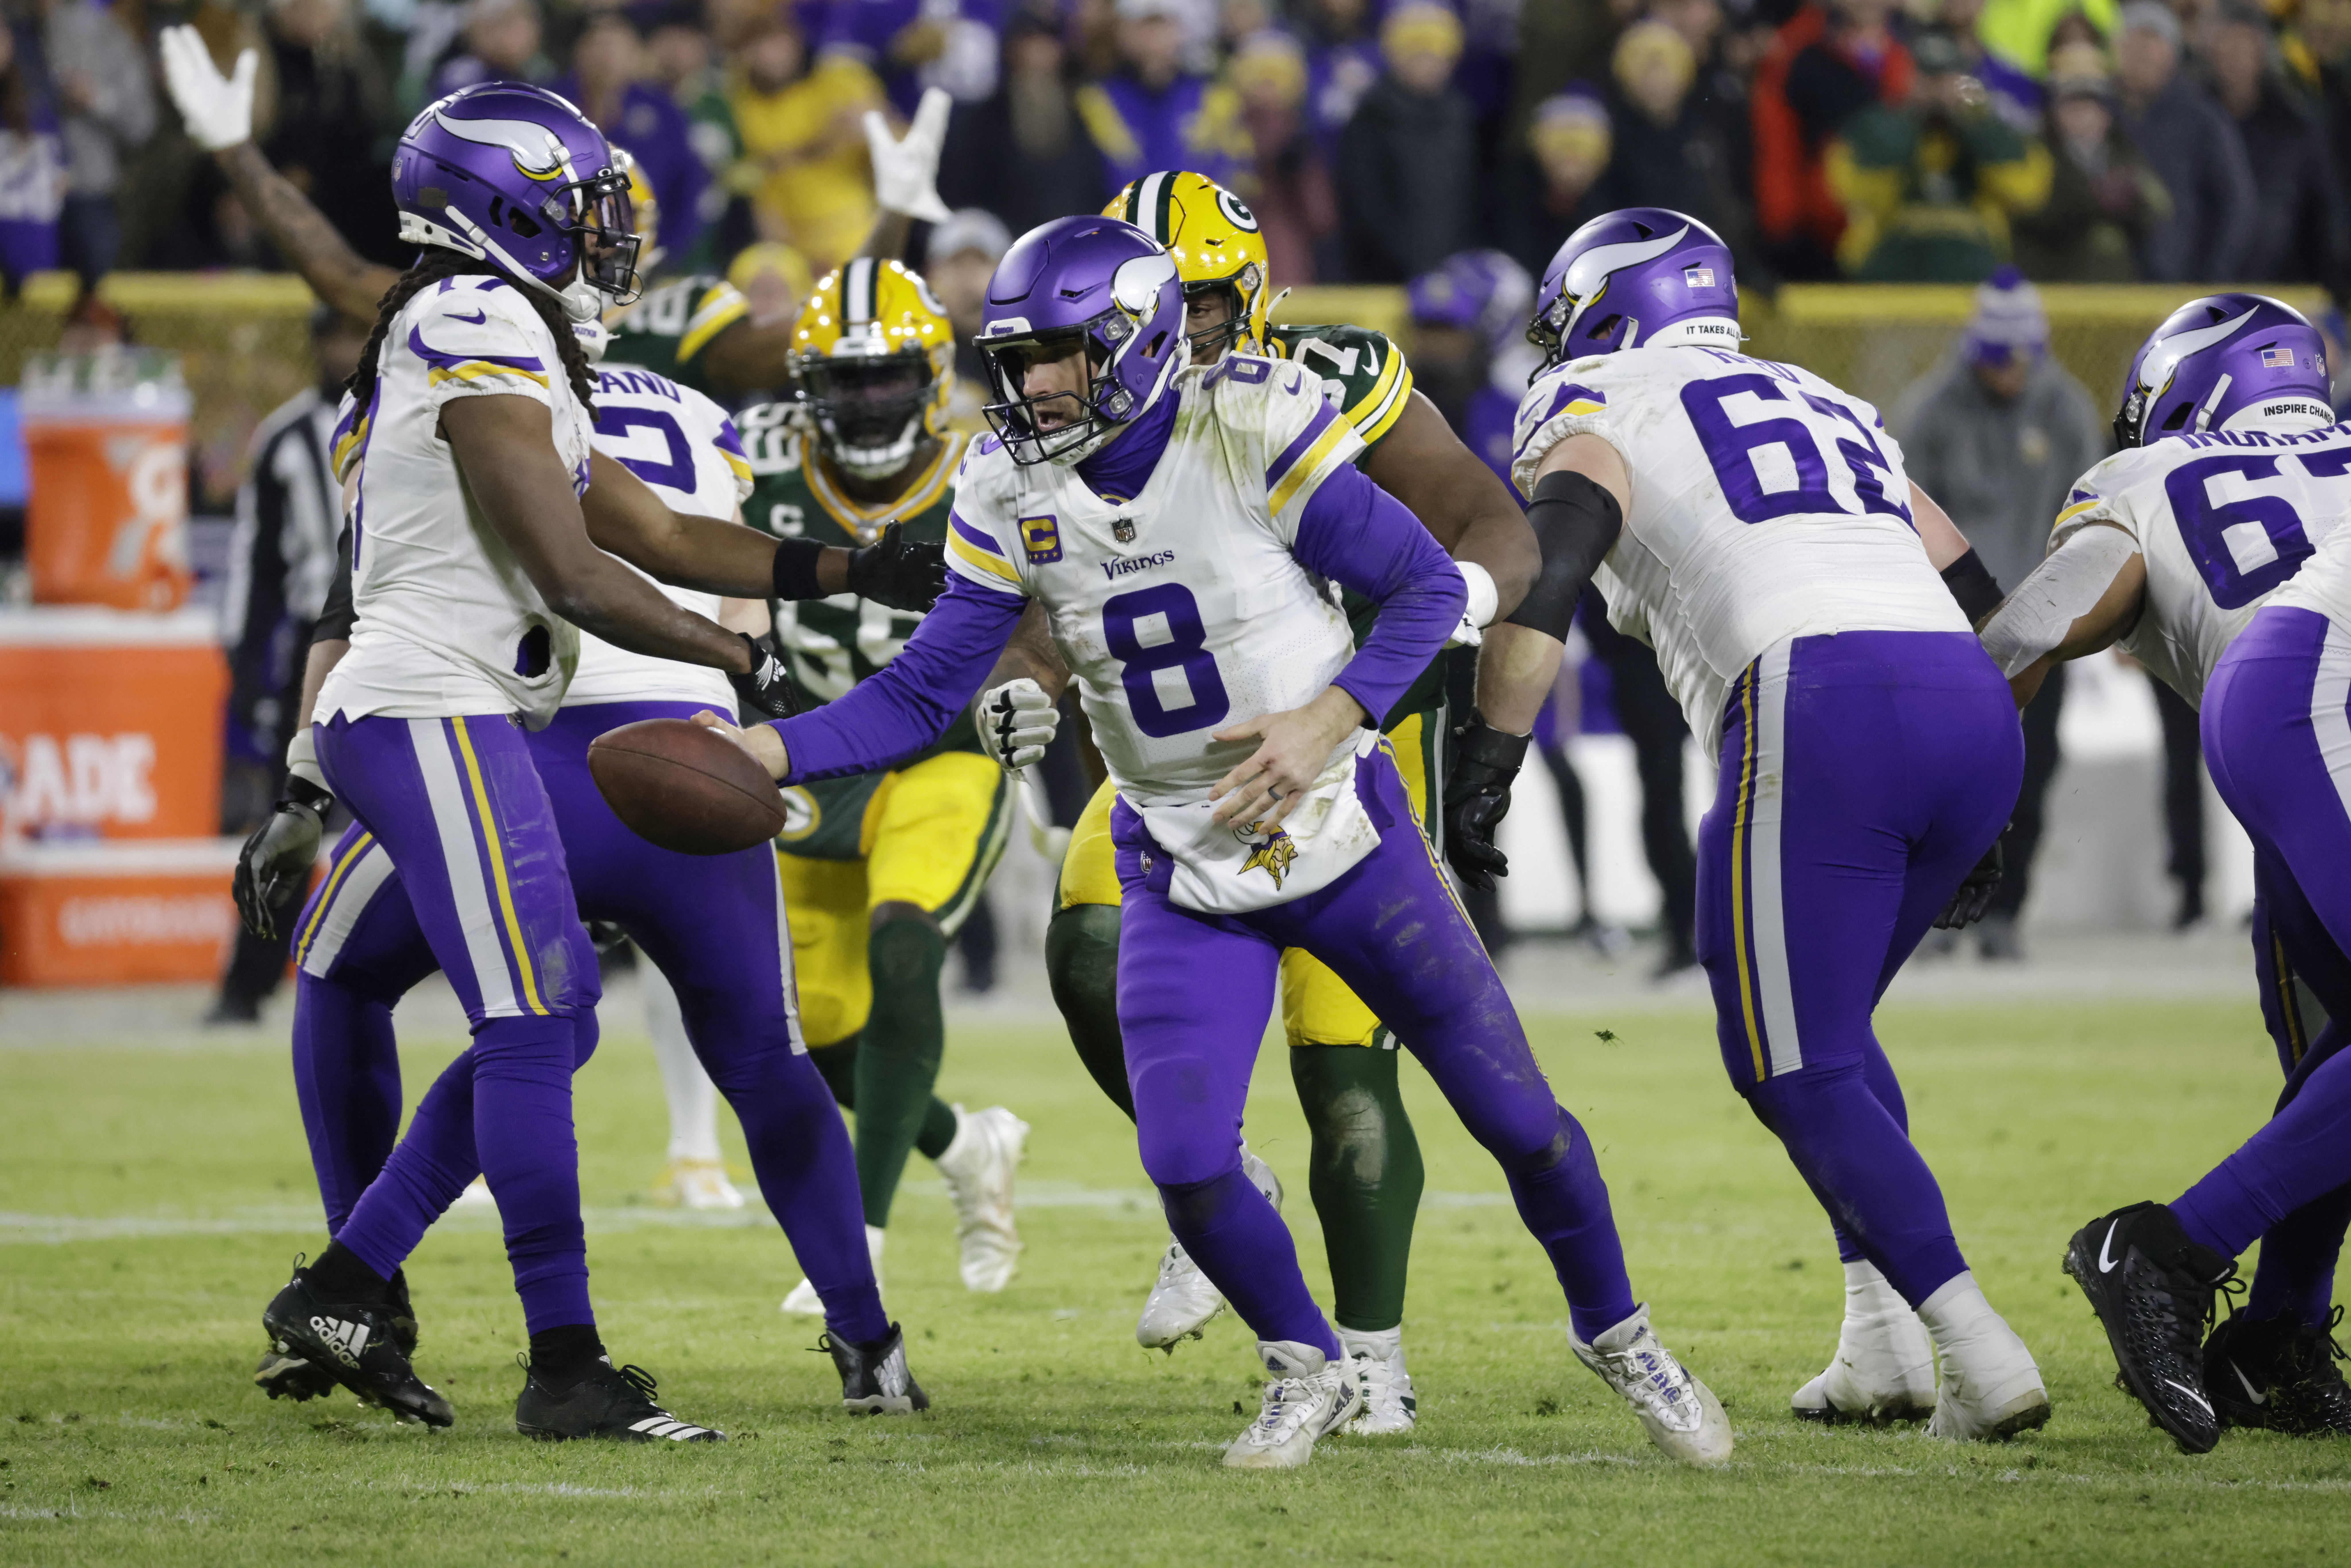 Minnesota Vikings vs Chicago Bears: How to watch live or stream online